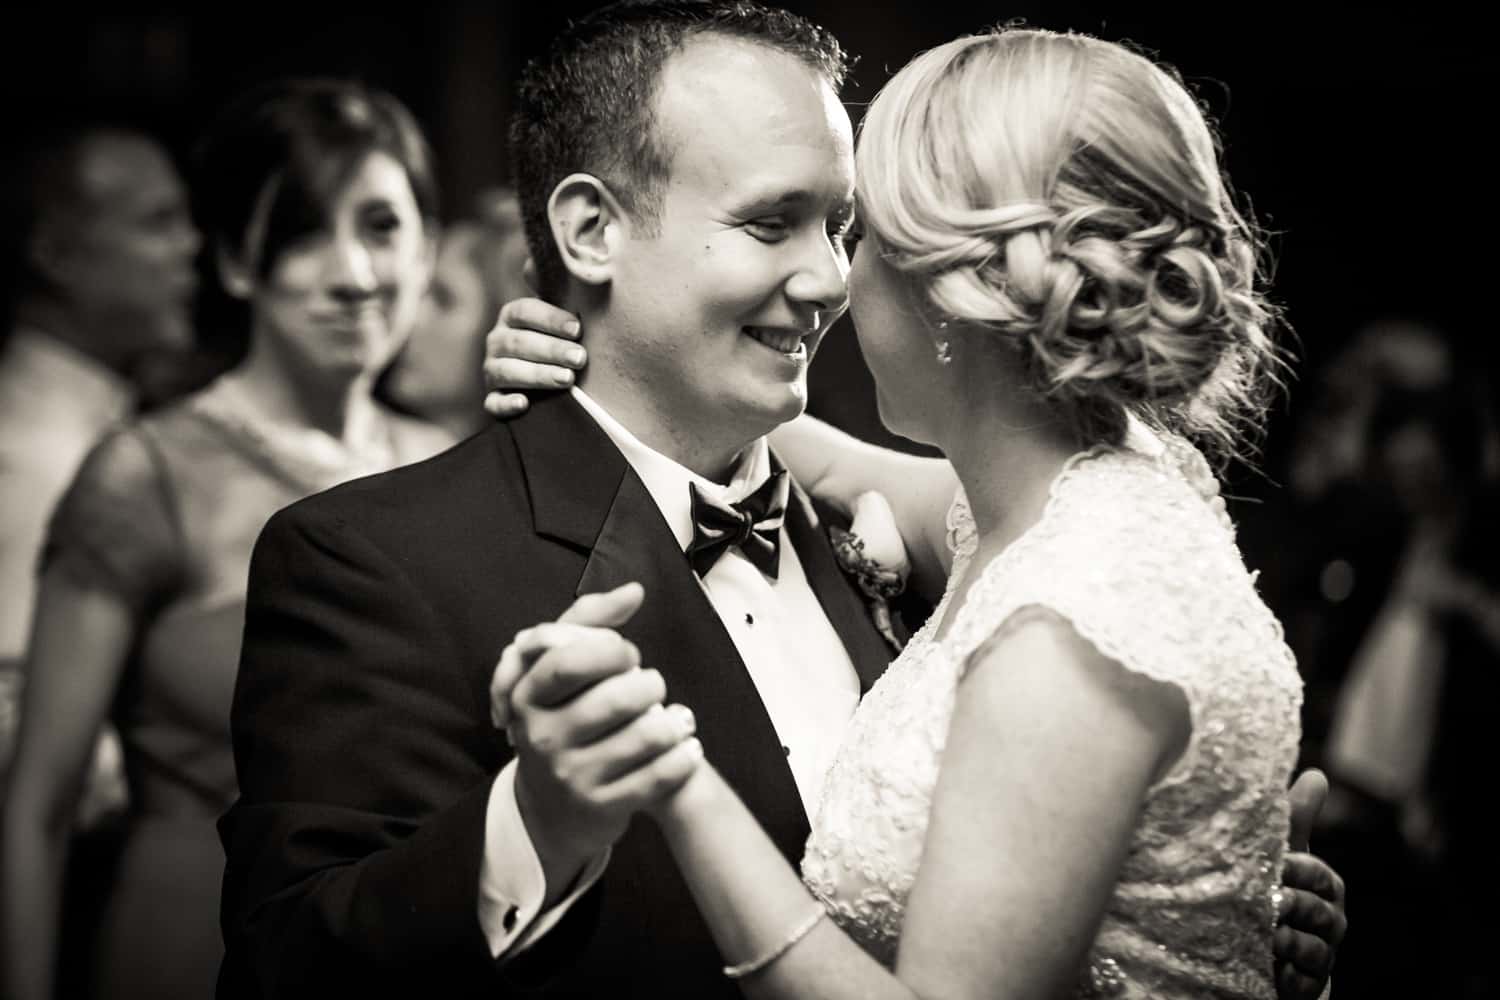 Black and white photo of bride and groom during first dance